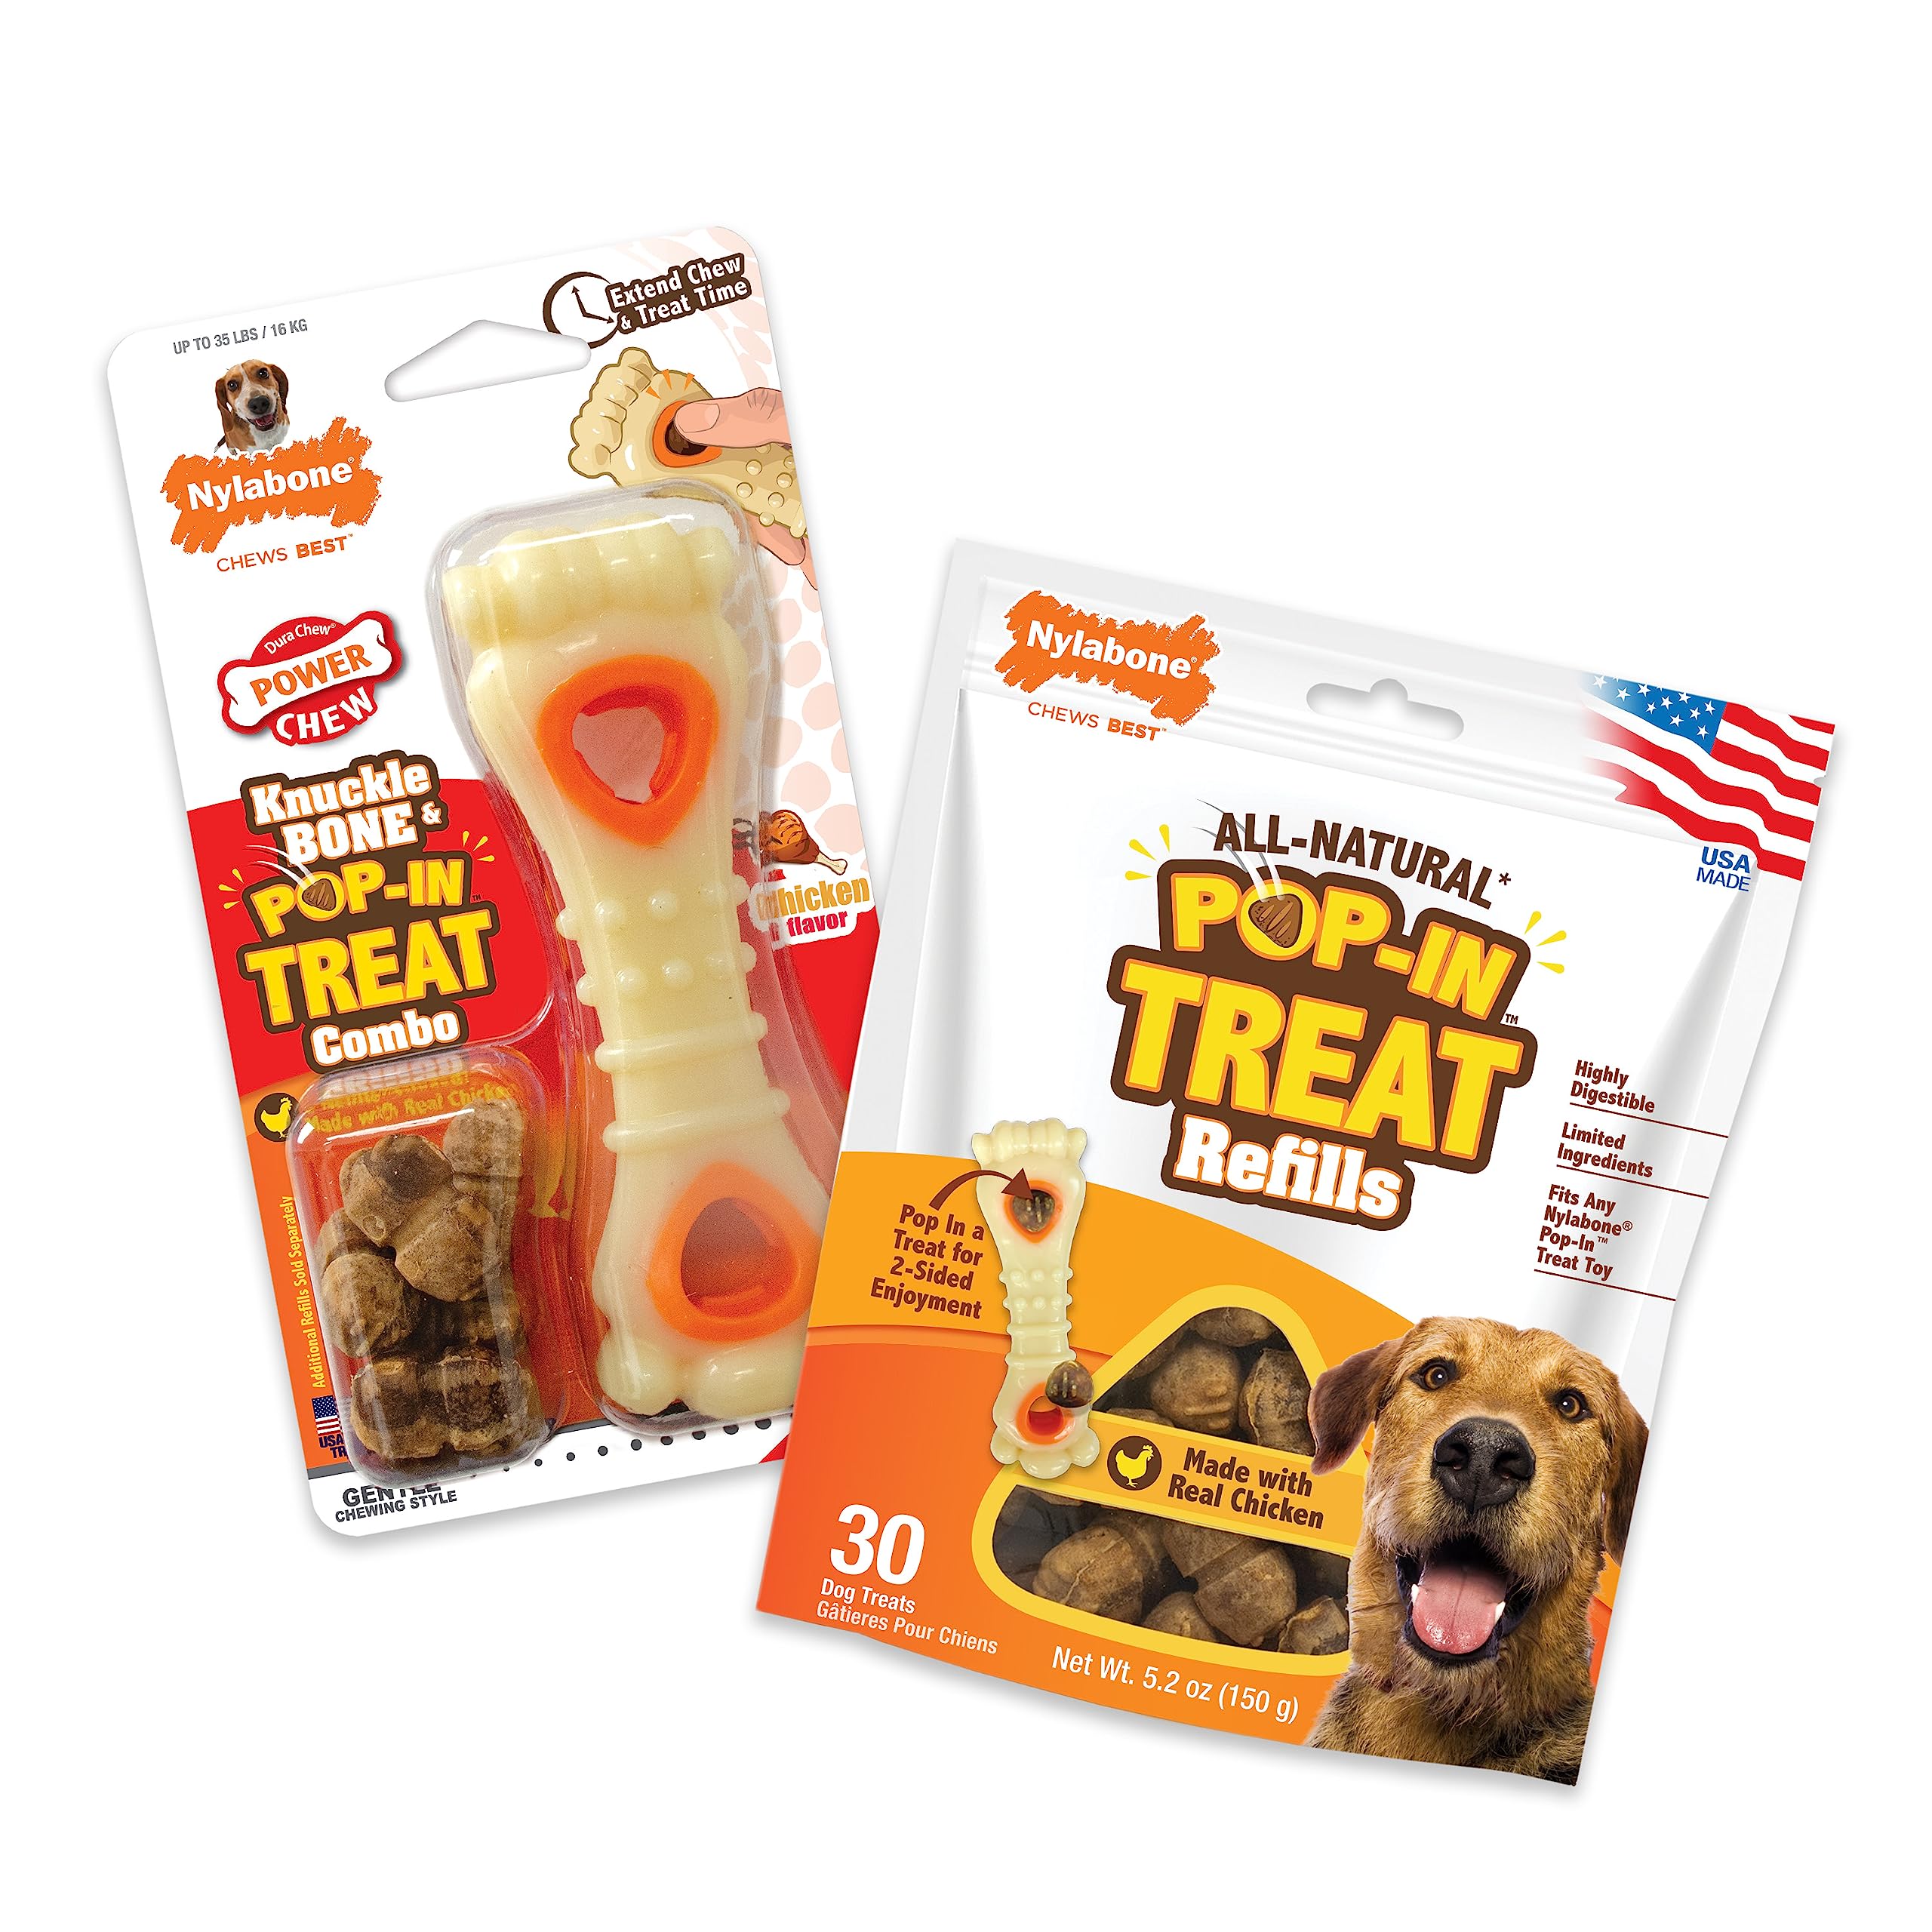 Nylabone Power Chew Knuckle Bone & Pop In Dog Treat Toy Combo Bundle - Tough Dog Toy for Aggressive Chewers and Treat Pouch - Durable Dog Toy - Chicken Flavor, Medium Wolf - Up to 35 lbs